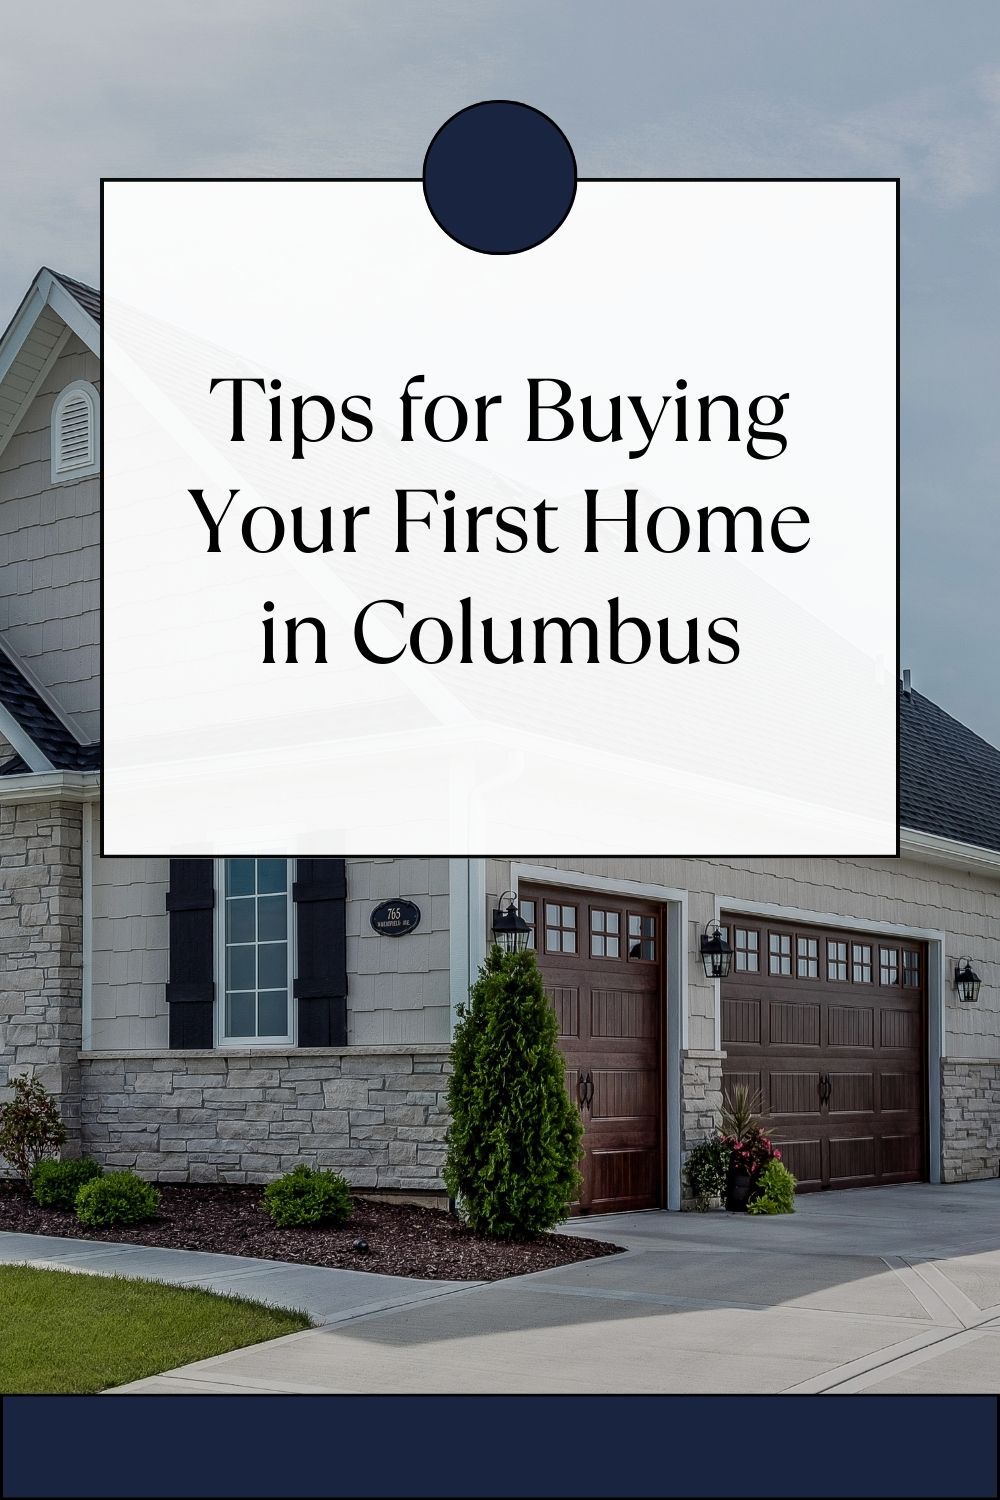 Tips for Buying Your First Home in Columbus